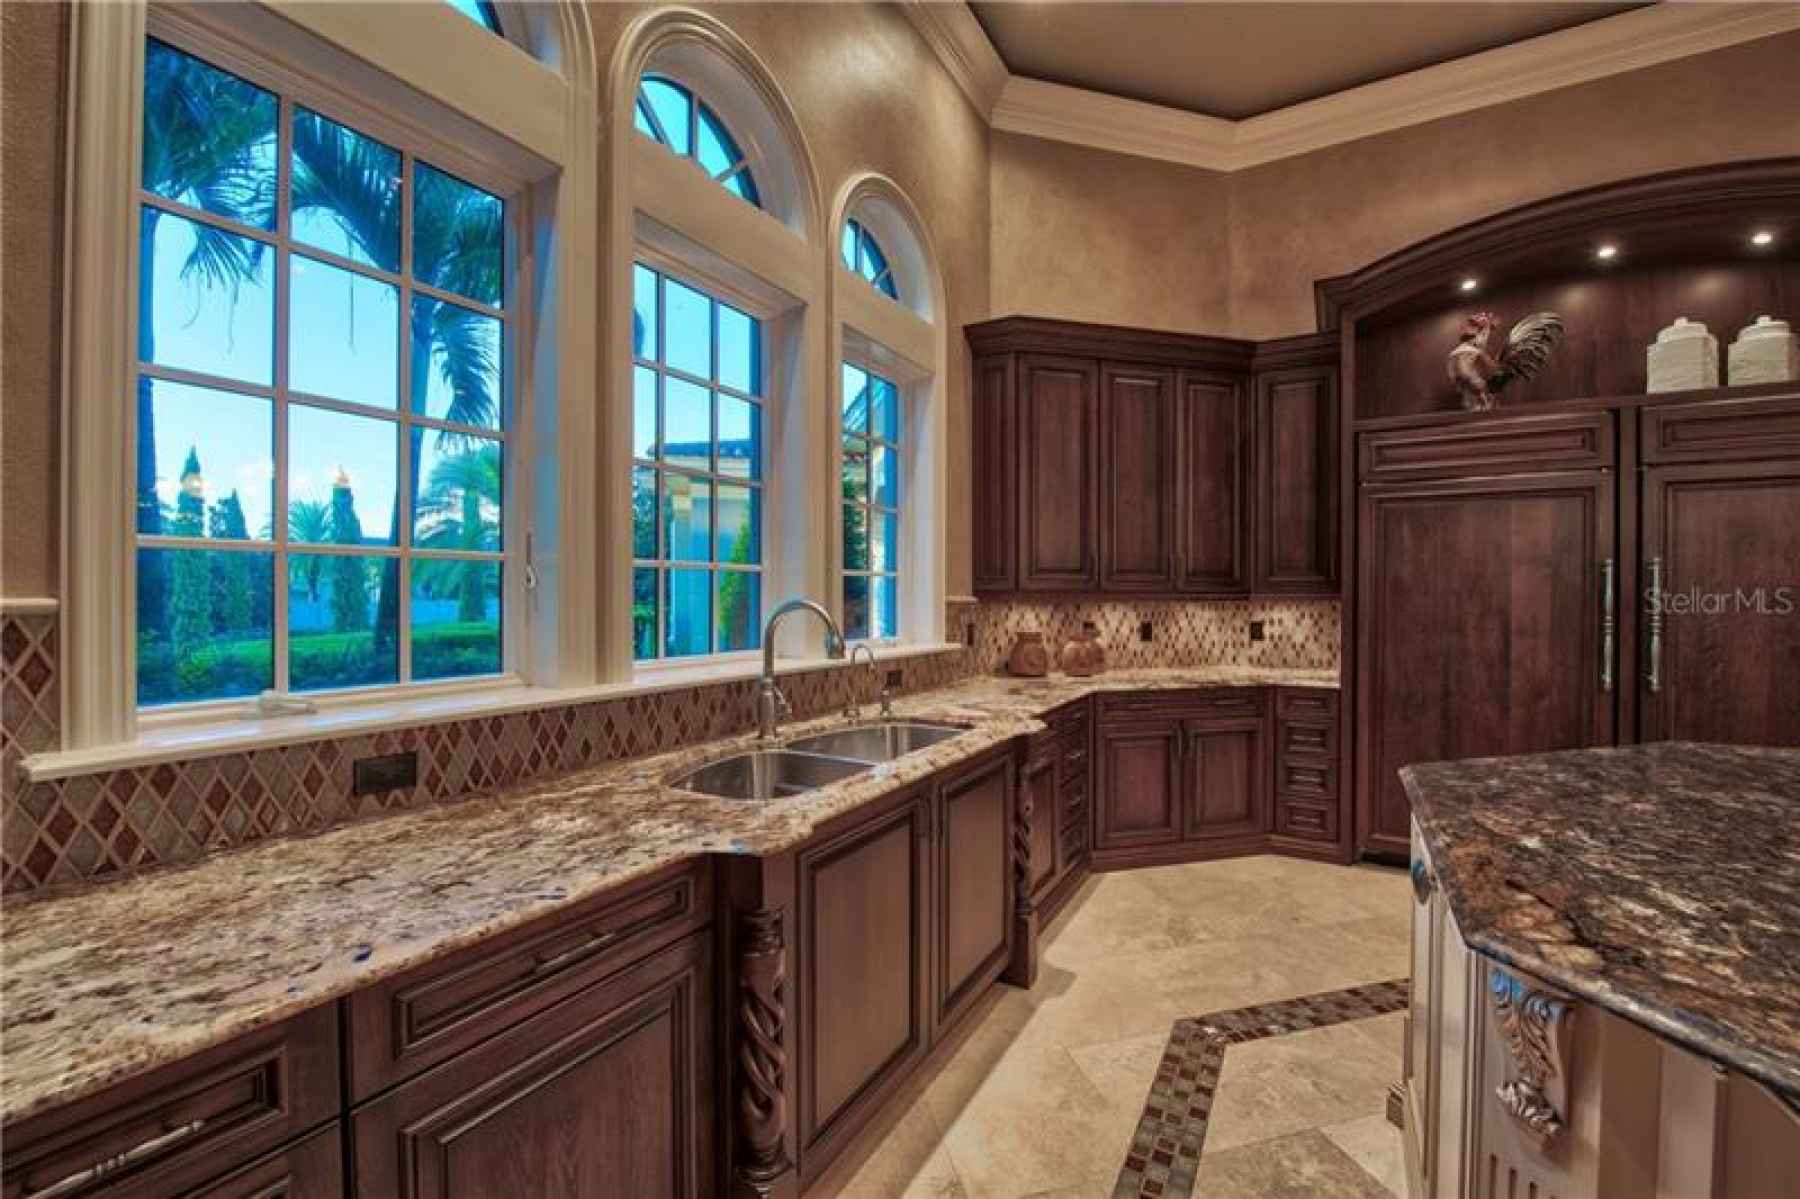 Tile Backsplash, Solid Wood Cabinetry, Stone Counters and Cleverly Hidden Appliances